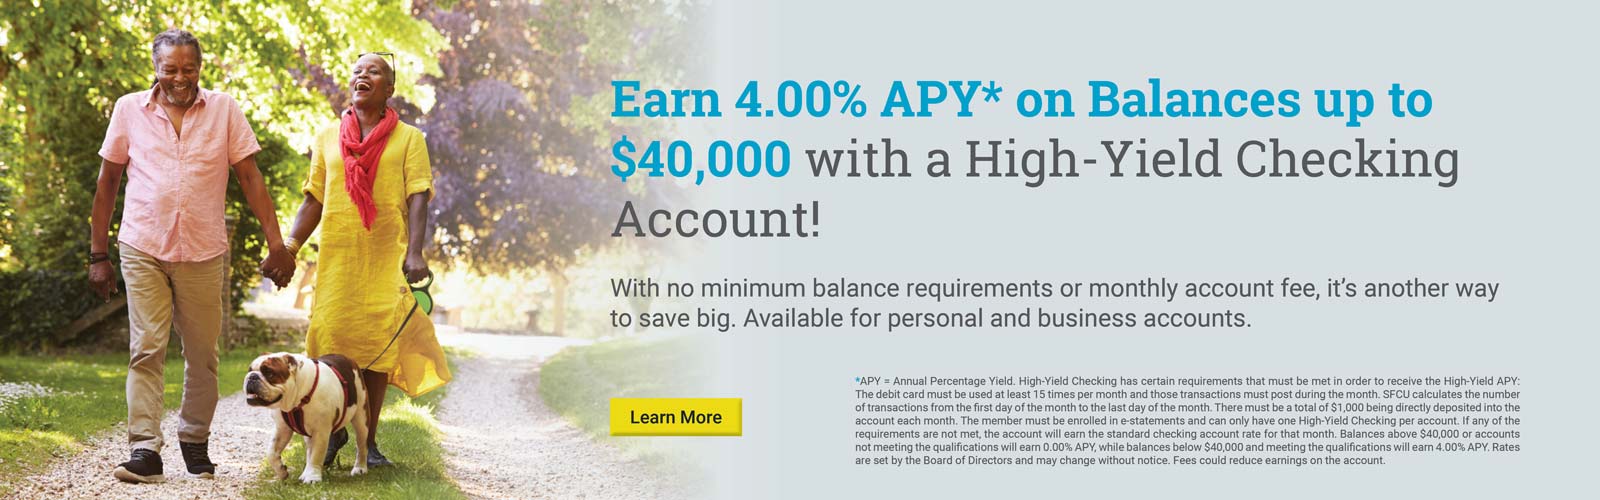 Earn up to 3.50% APY* with a High-Yield Checking Account. 

Plus with no minimum balance requirements or monthly account fee, it's another way to save big.